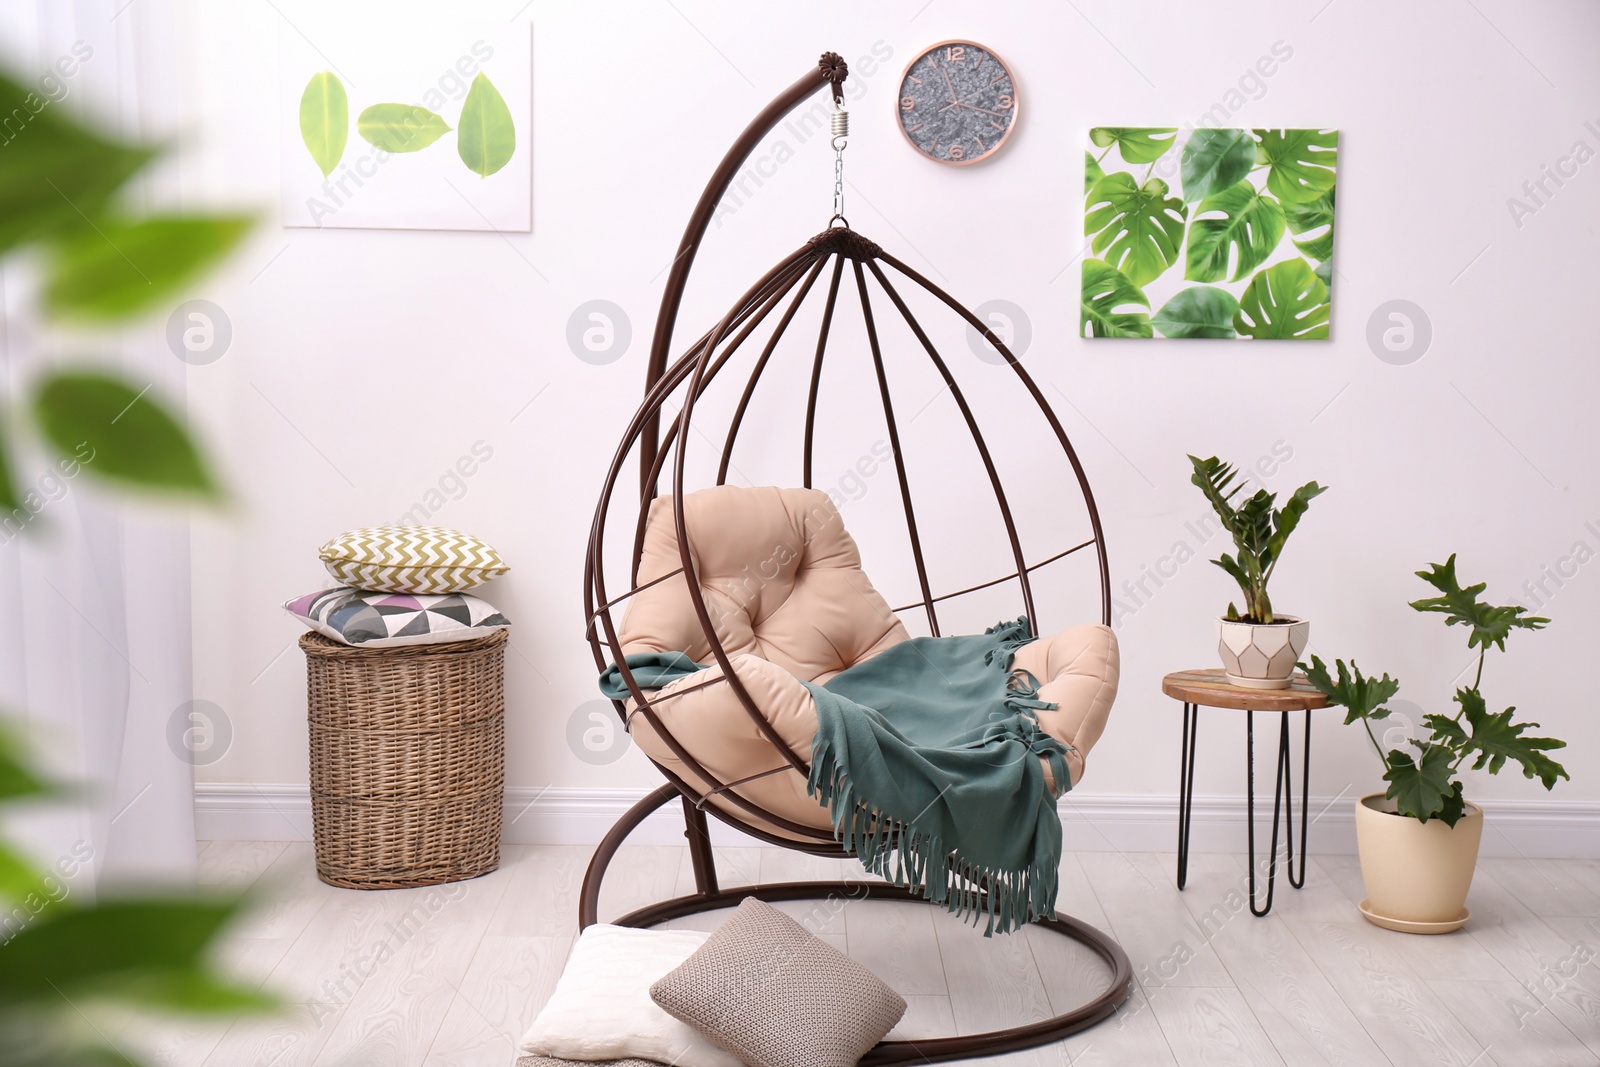 Photo of Tropical plants with green leaves and swing chair in room interior